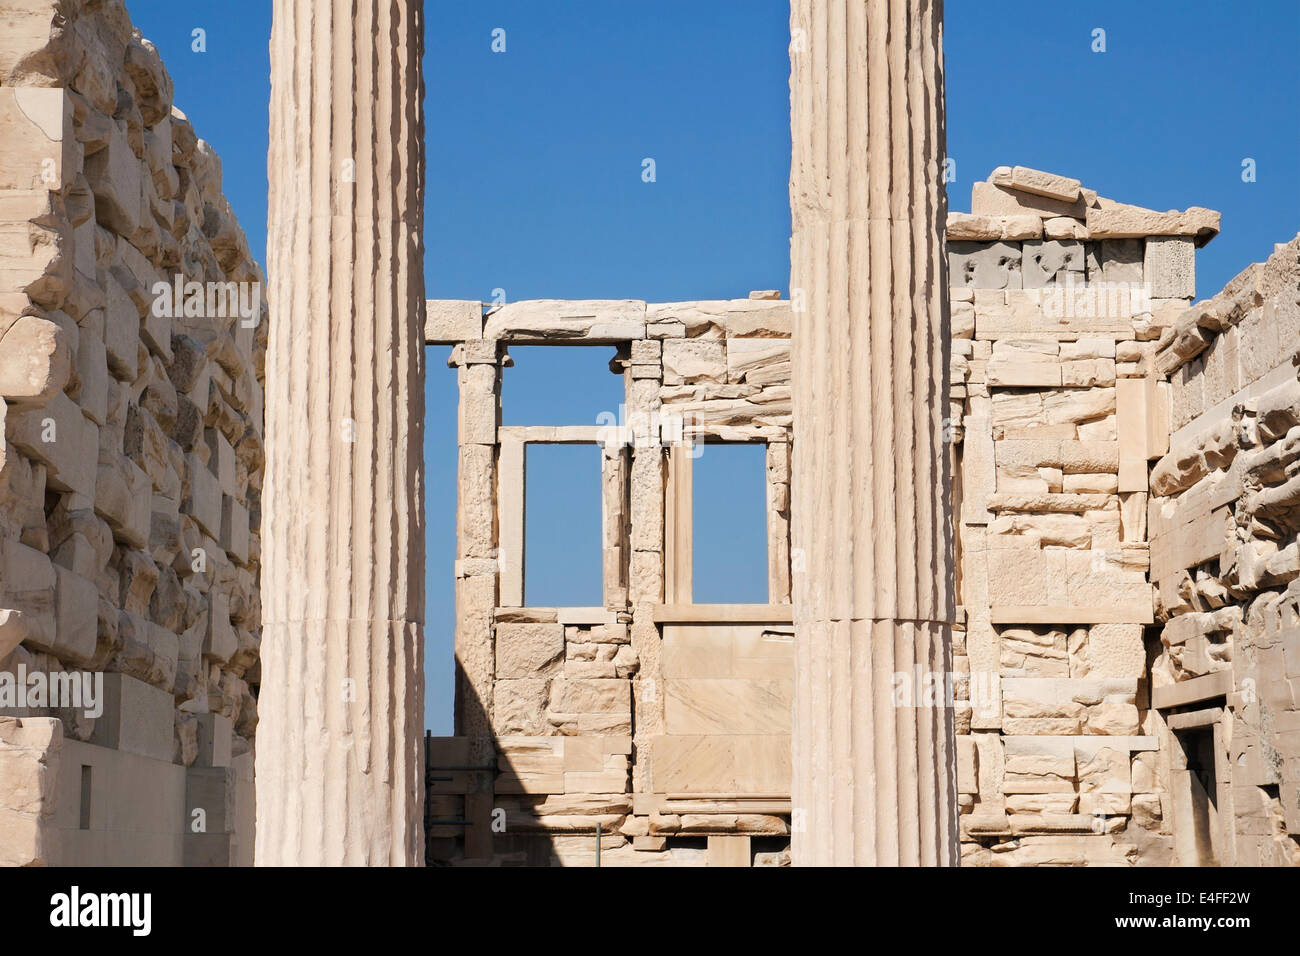 Interior of the greek temple of Erechteum in the Acropolis, Athens, Greece. Stock Photo